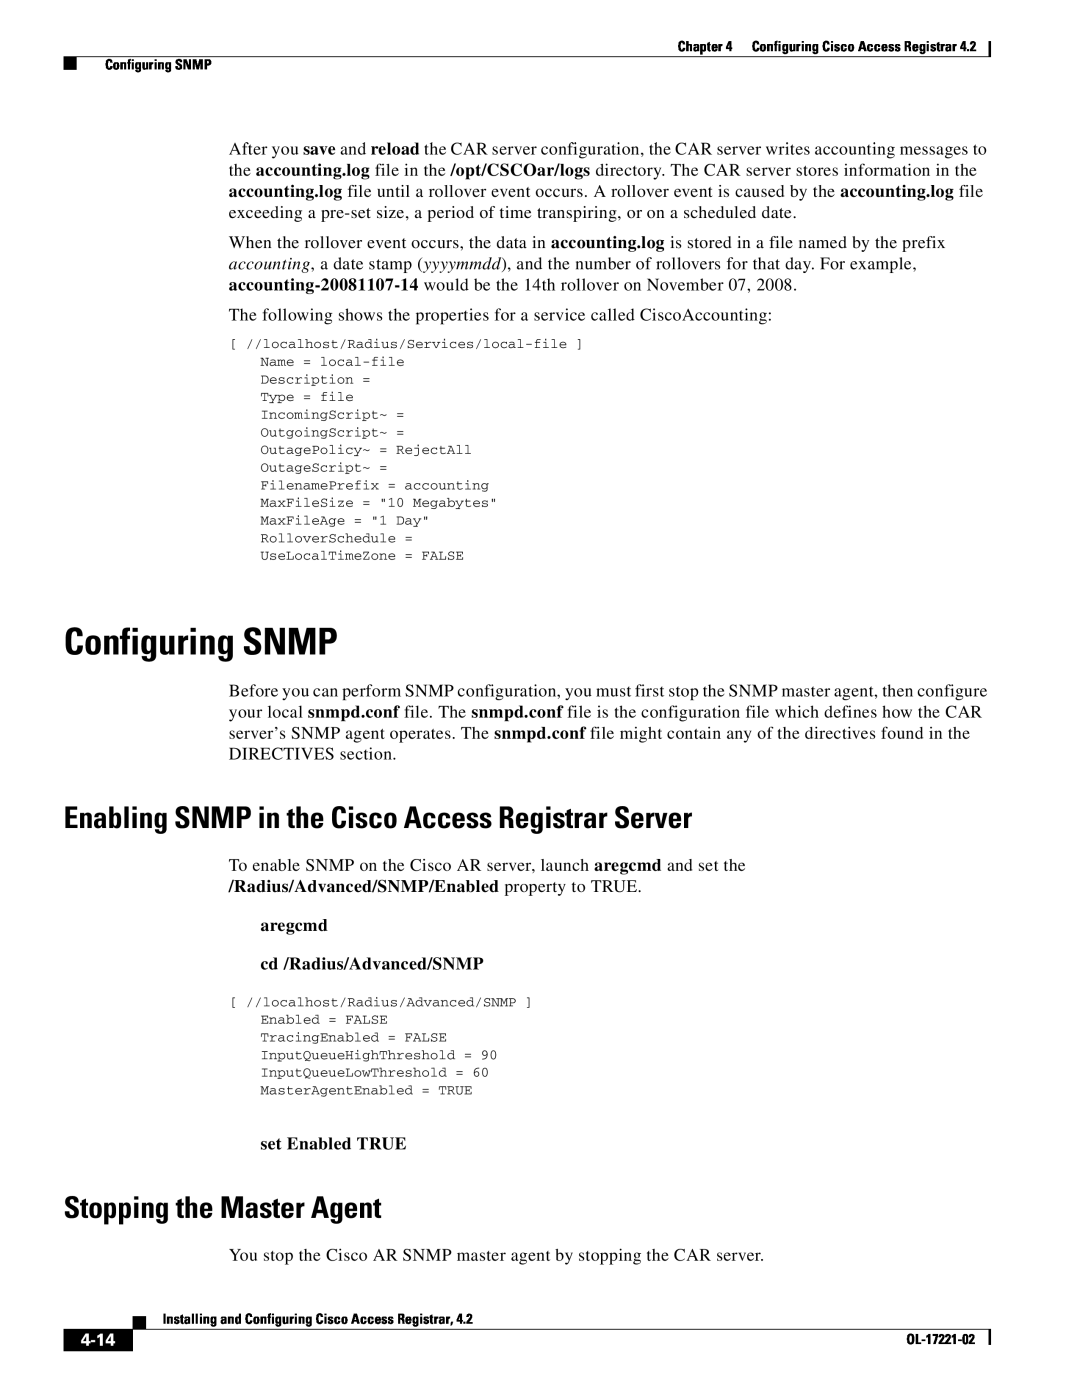 Cisco Systems 4.2 Enabling SNMP in the Cisco Access Registrar Server, Stopping the Master Agent, set Enabled TRUE, 4-14 